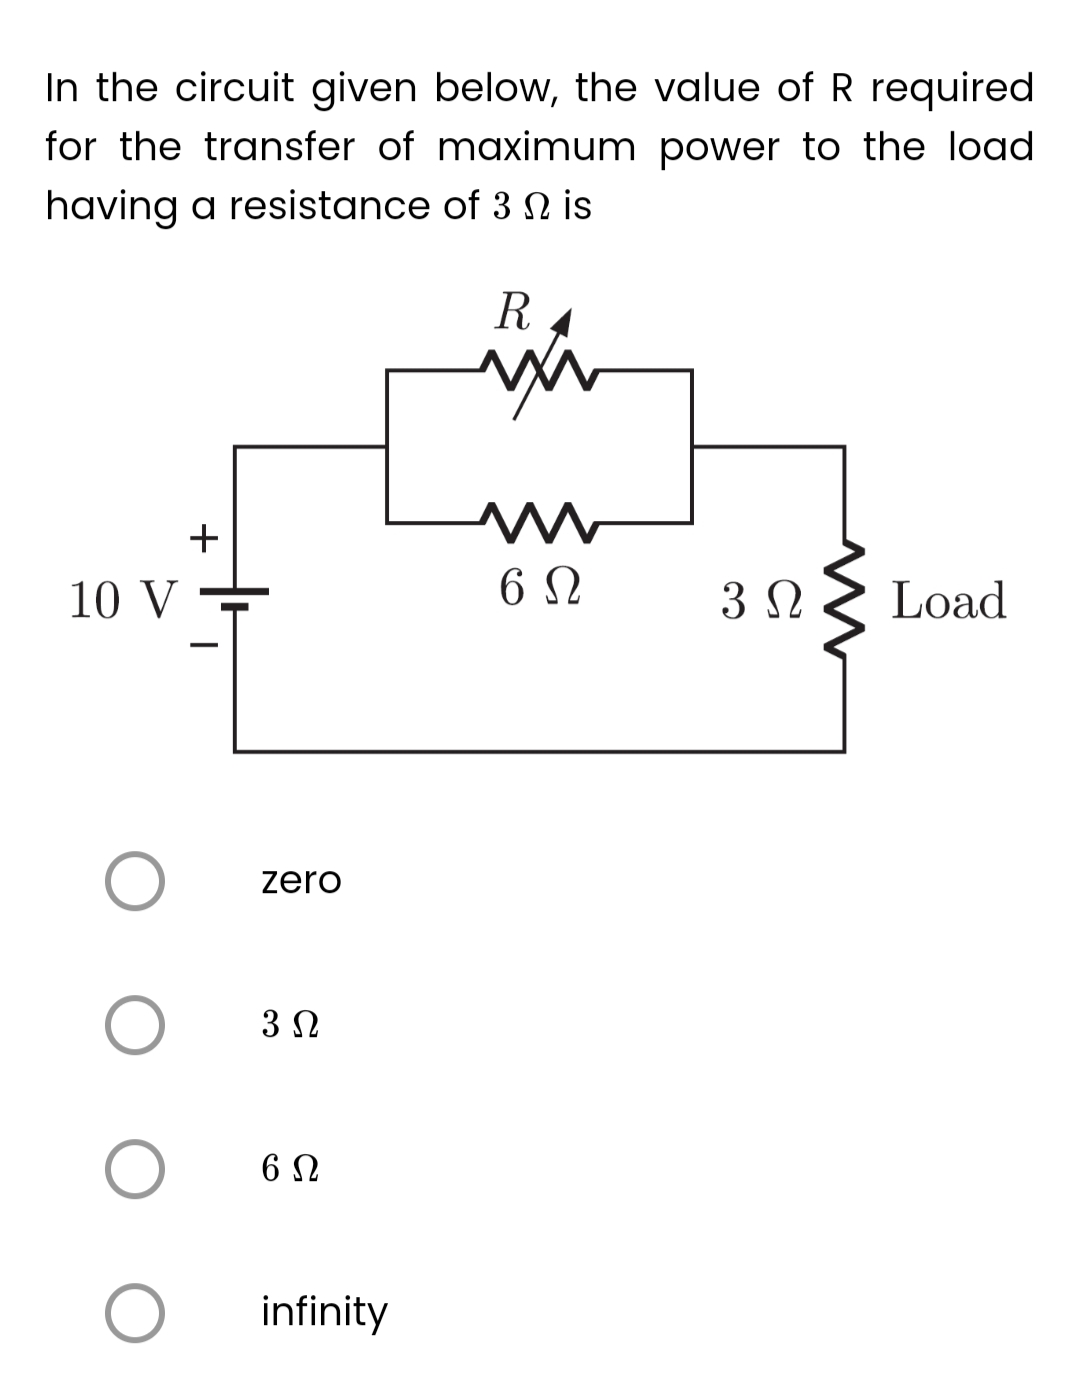 In the circuit given below, the value of R required.
for the transfer of maximum power to the load
having a resistance of 3 N is
10 V
O
O
O
O
+
zero
3 Ω
6 Ω
infinity
R
ww
6Ω
3 Ω Load